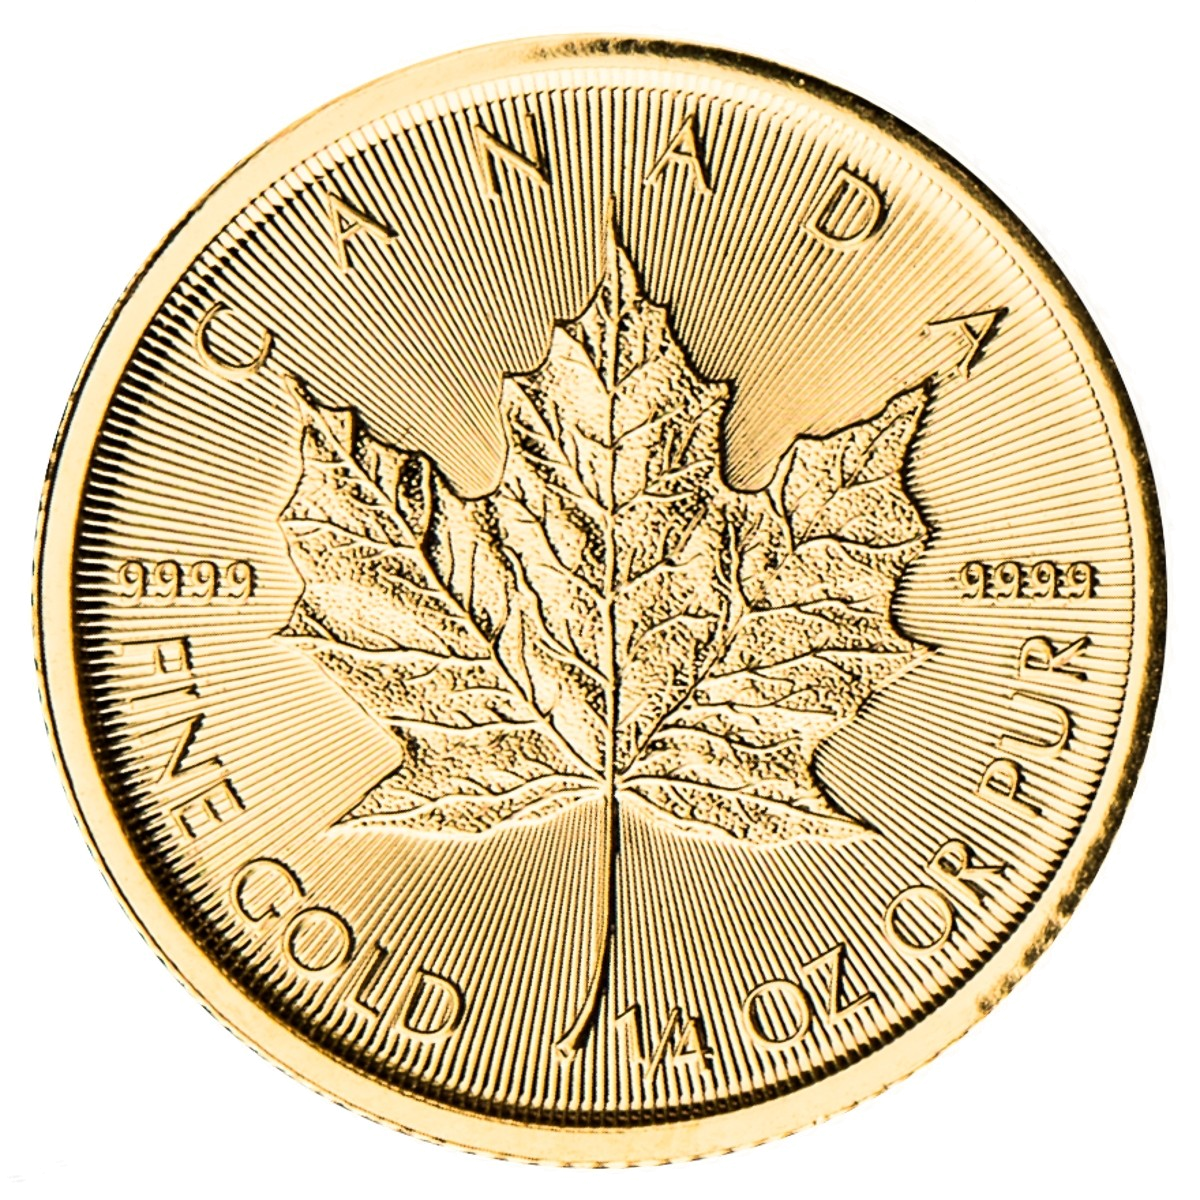 1/4 oz Canadian Gold Maple Leaf Coin